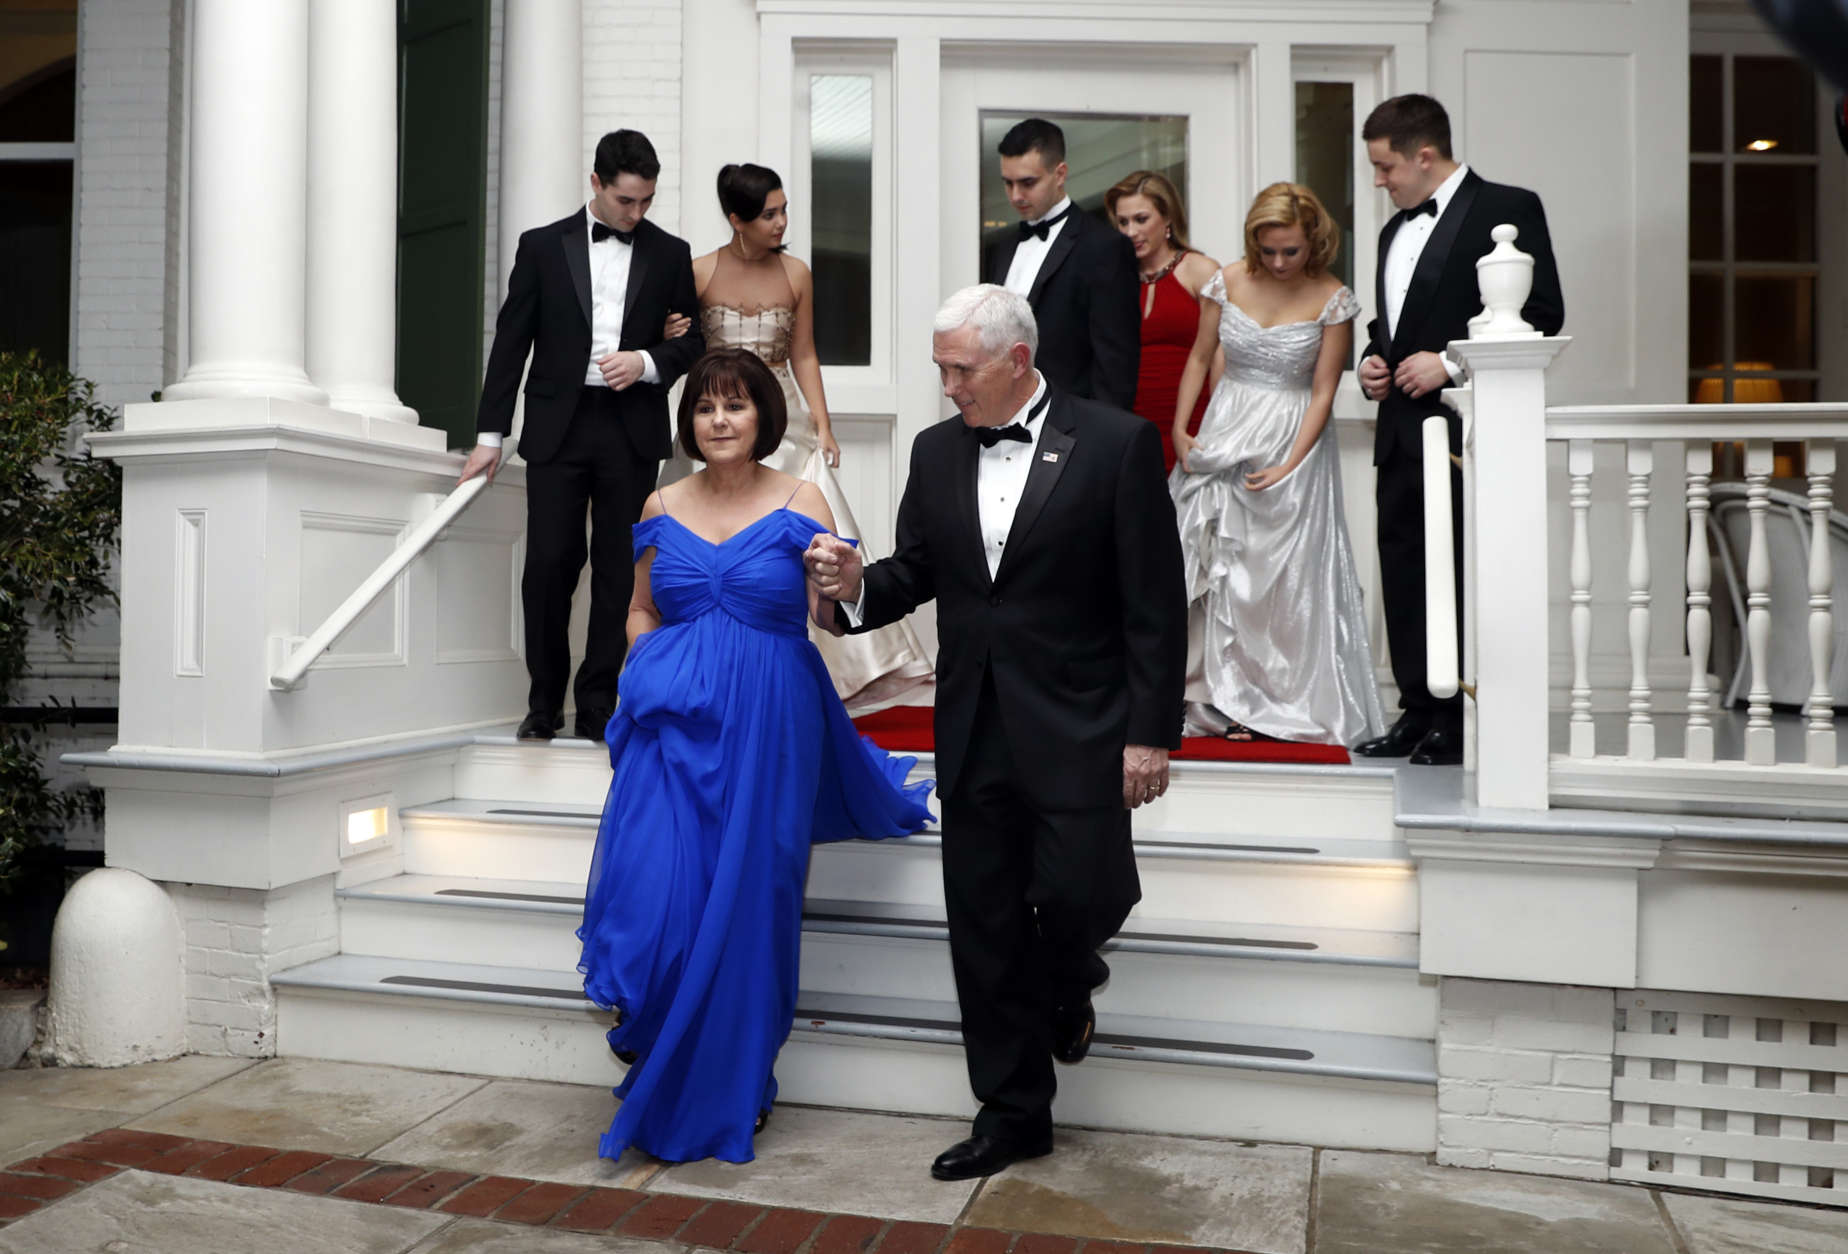 Vice President Mike Pence right, assists his wife Karen Pence as they depart the Naval Observatory for several inaugural balls, Friday, Jan. 20, 2017 in Washington. (AP Photo/Alex Brandon)